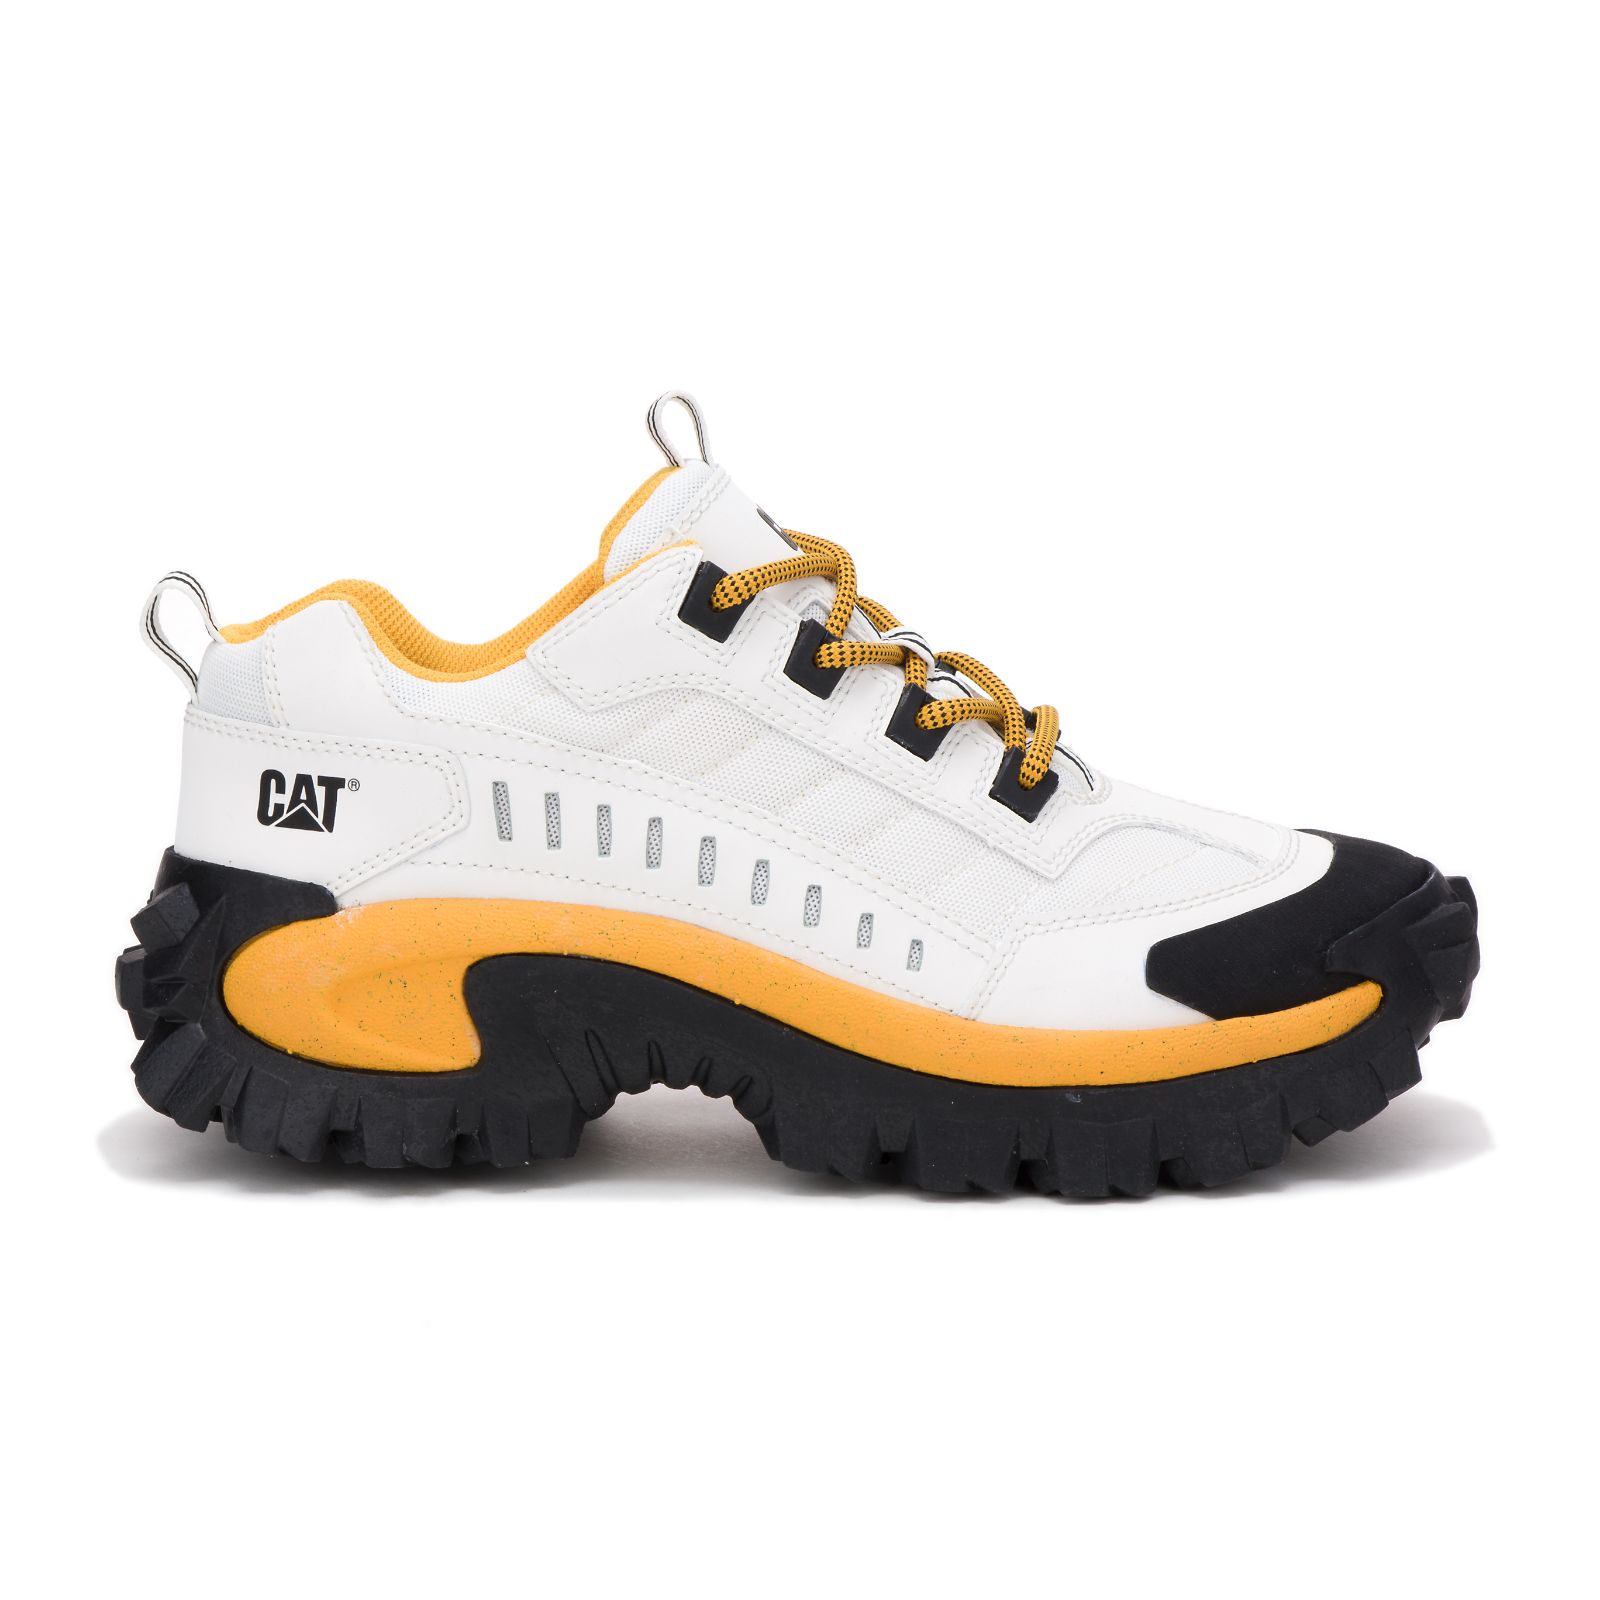 Caterpillar Intruder Philippines - Mens Casual Shoes - White Yellow 73162NFXT